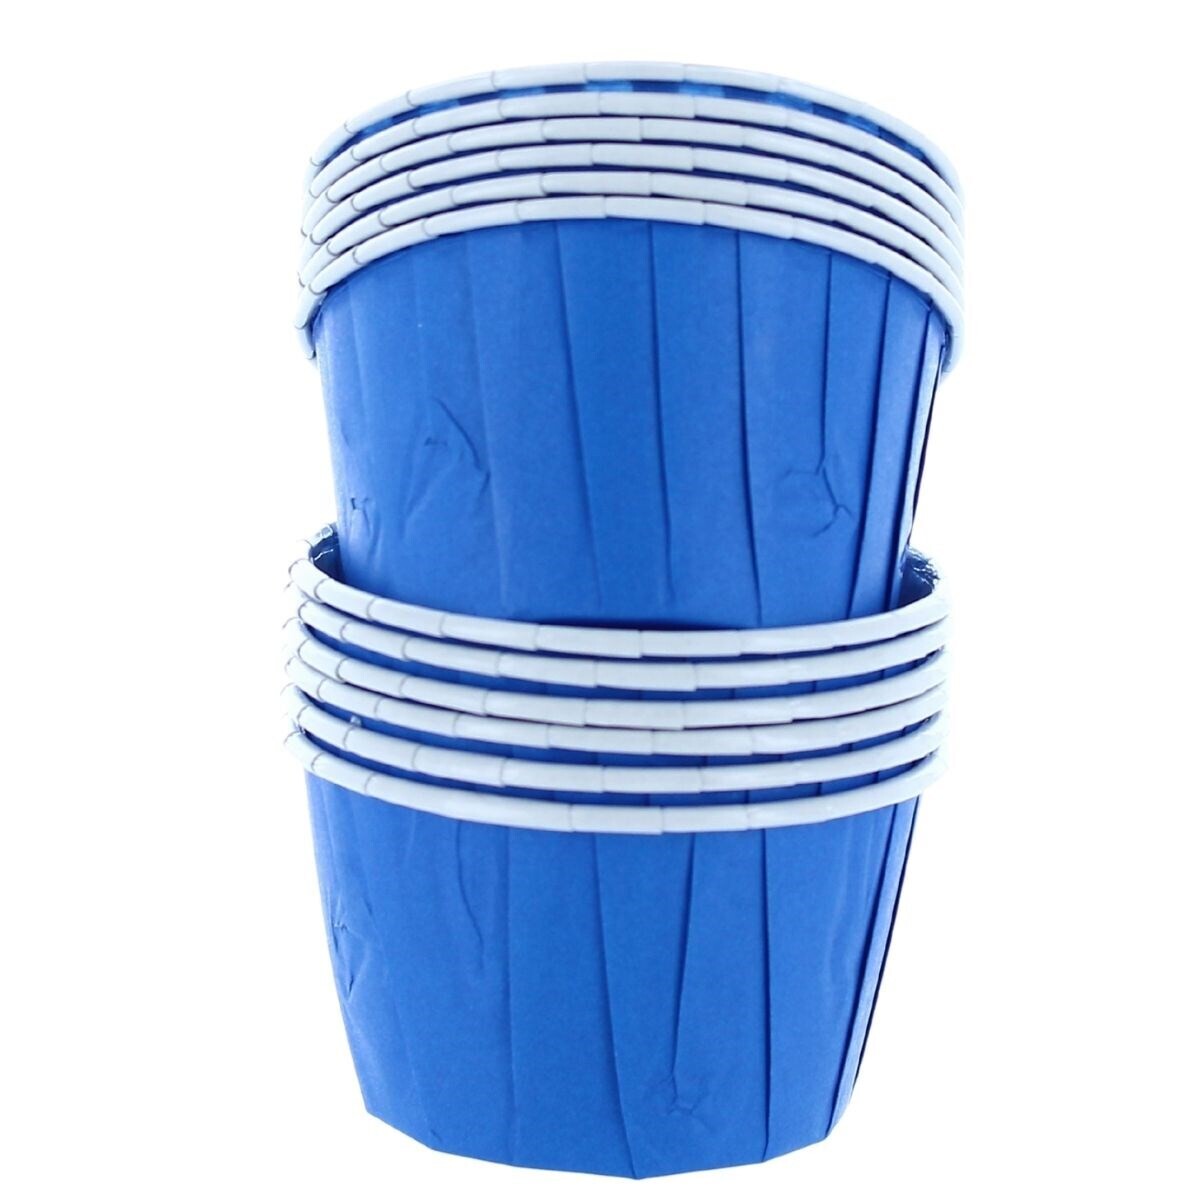 Baked With Love Baking Cups -BLUE - Κυπελάκια Ψησίματος -Μπλε 12 τεμ